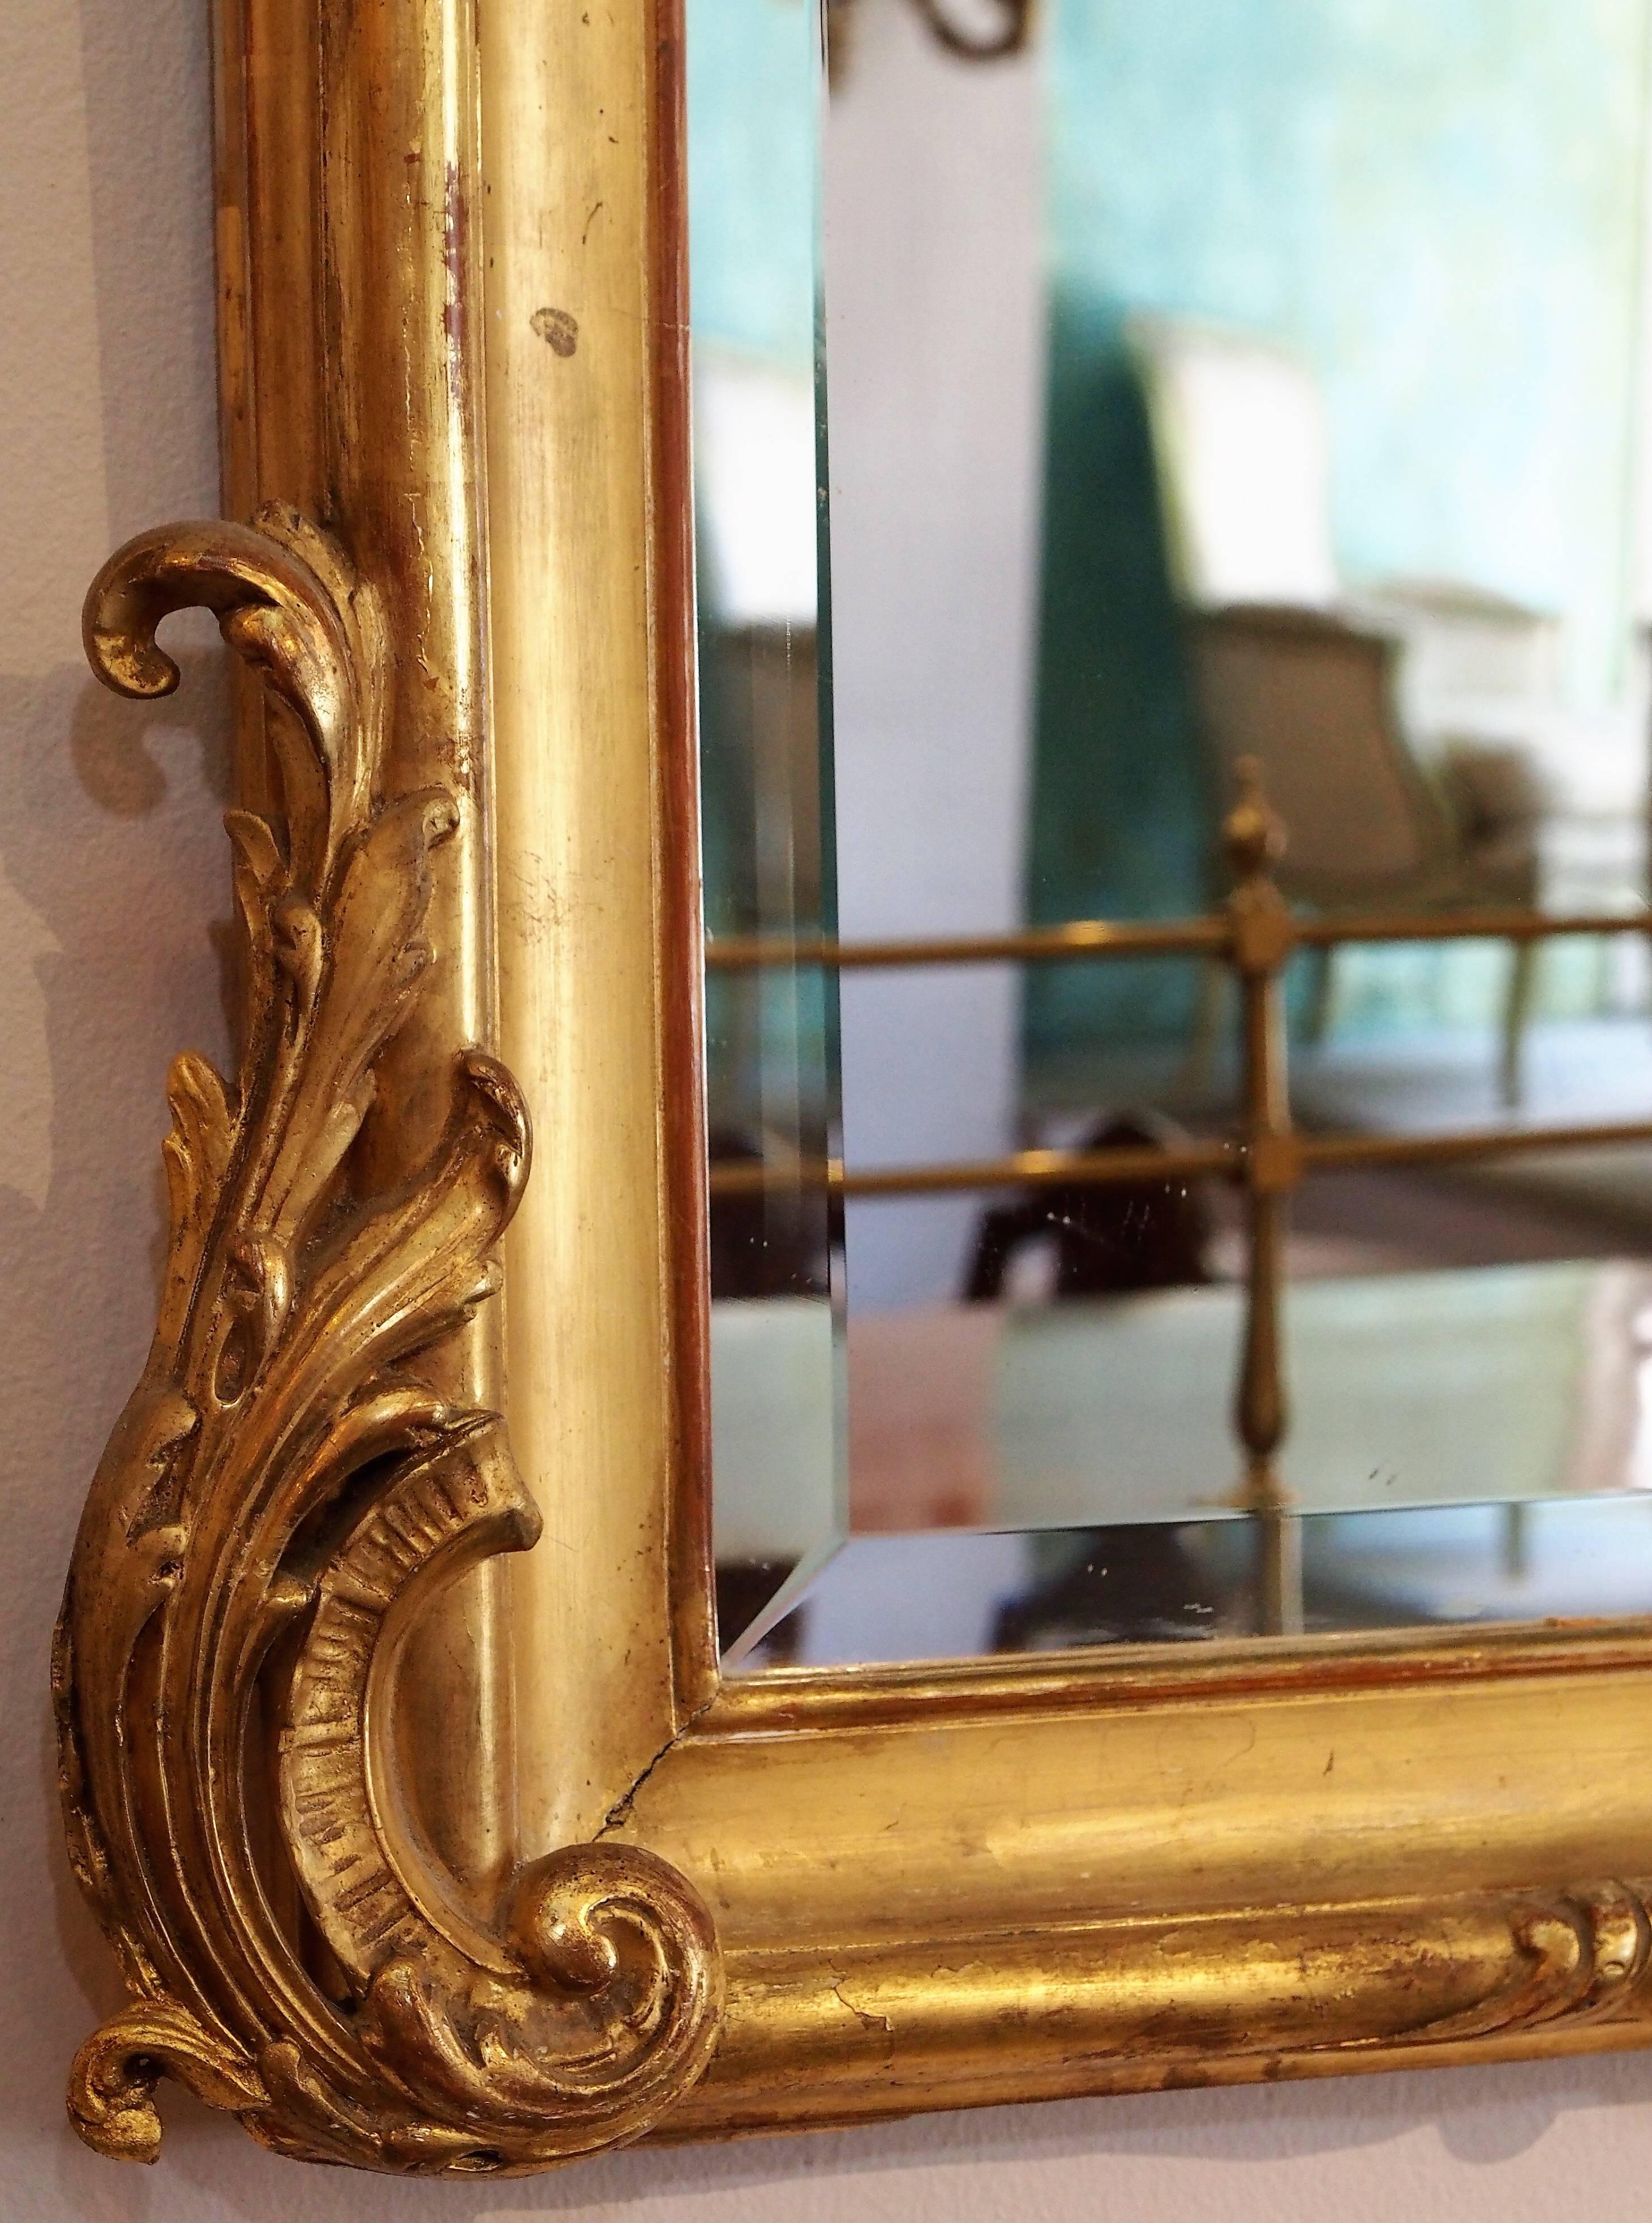 Mid-19th Century Finest Quality Antique French Gold Leaf Mirror with Beveled Glass, Cherub